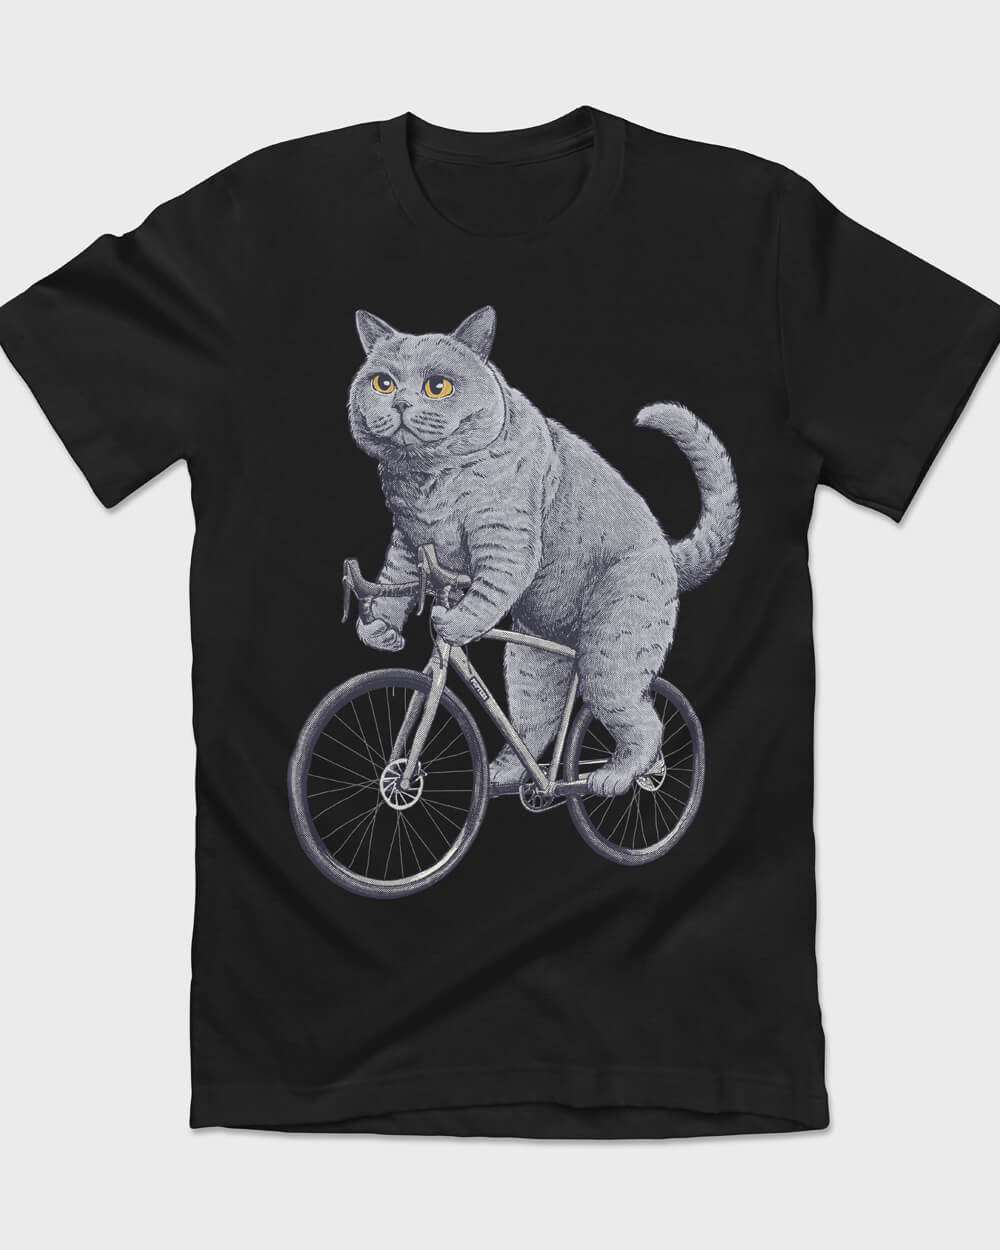 B&W British Shorthair Cat on a bicycle tee design